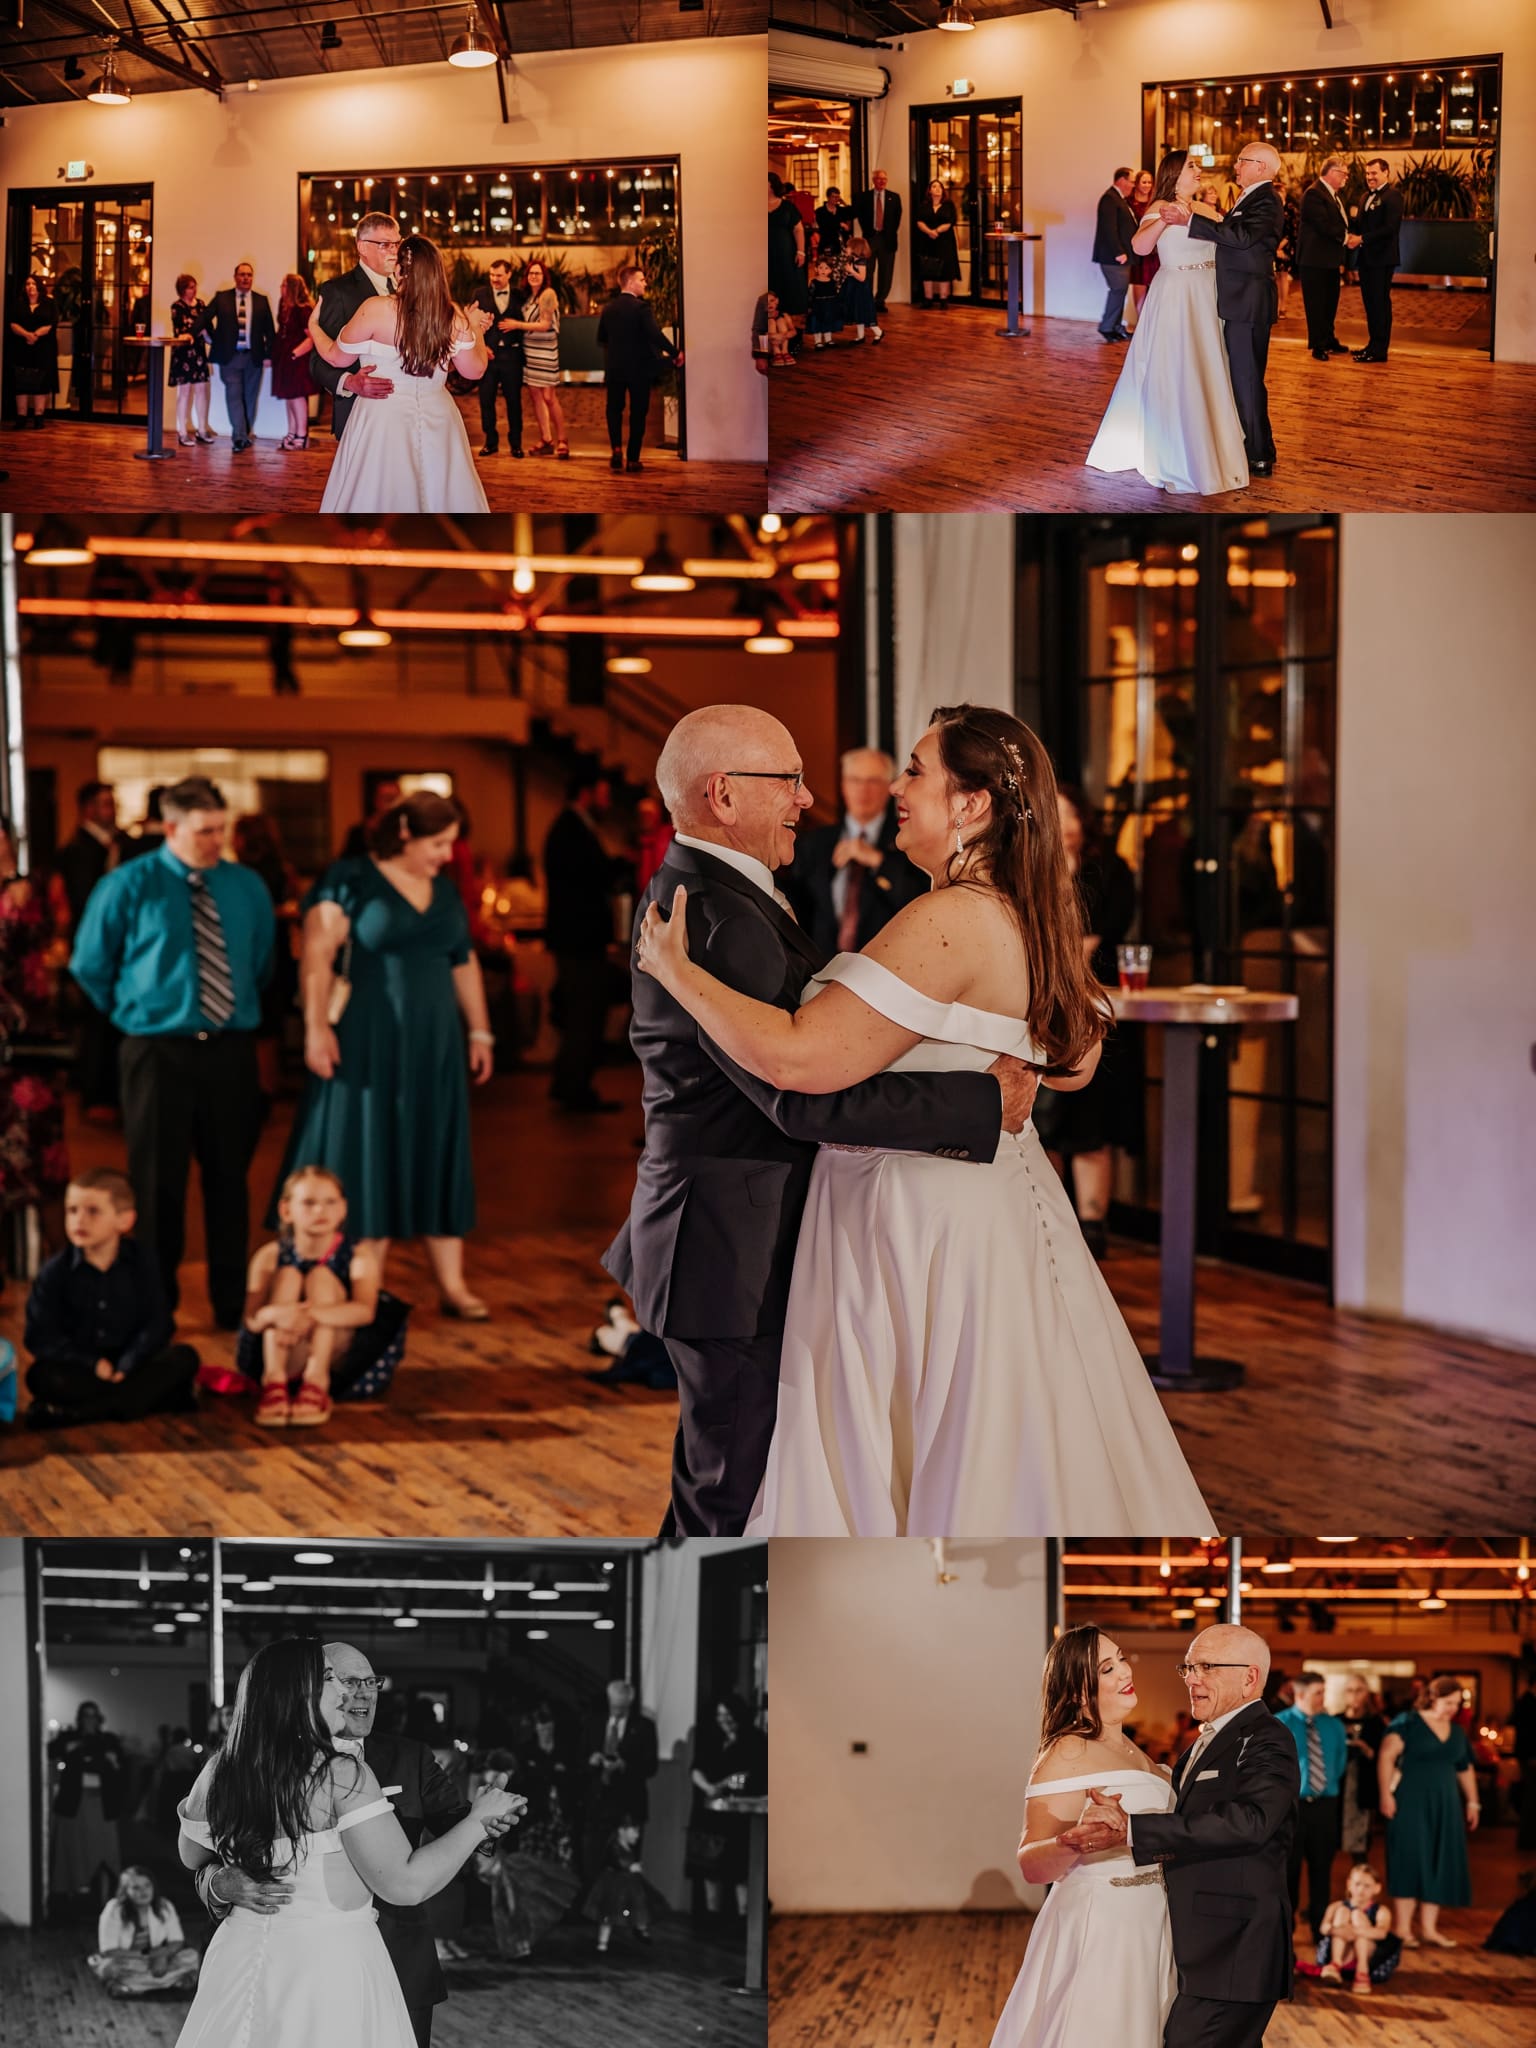 step father and daughter dance at wedding reception